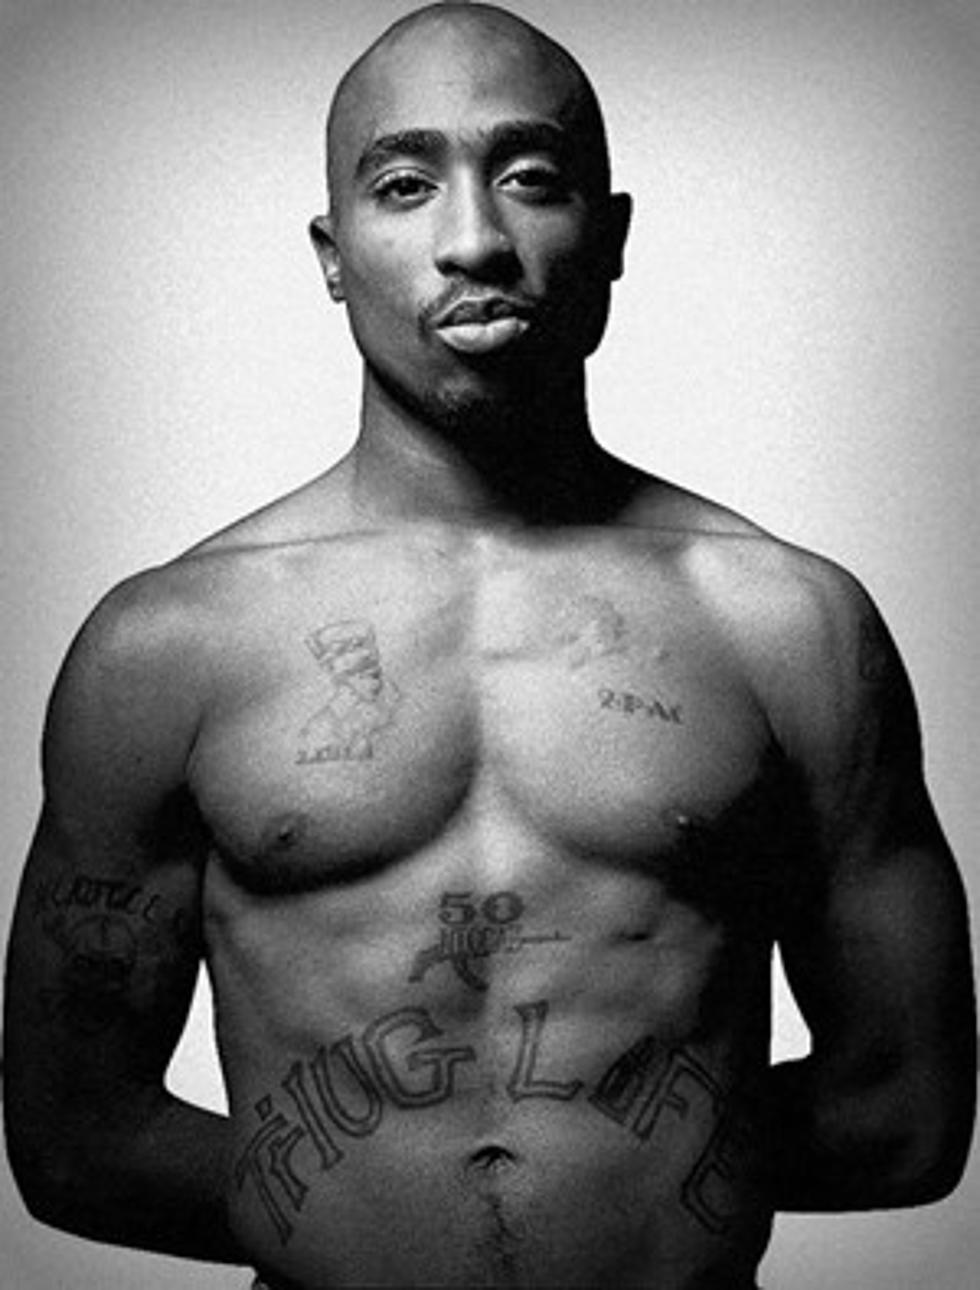 Tupac Becomes The 6th Rap Artist Inducted Into The Rock & Roll Hall Of Fame – Tha Wire